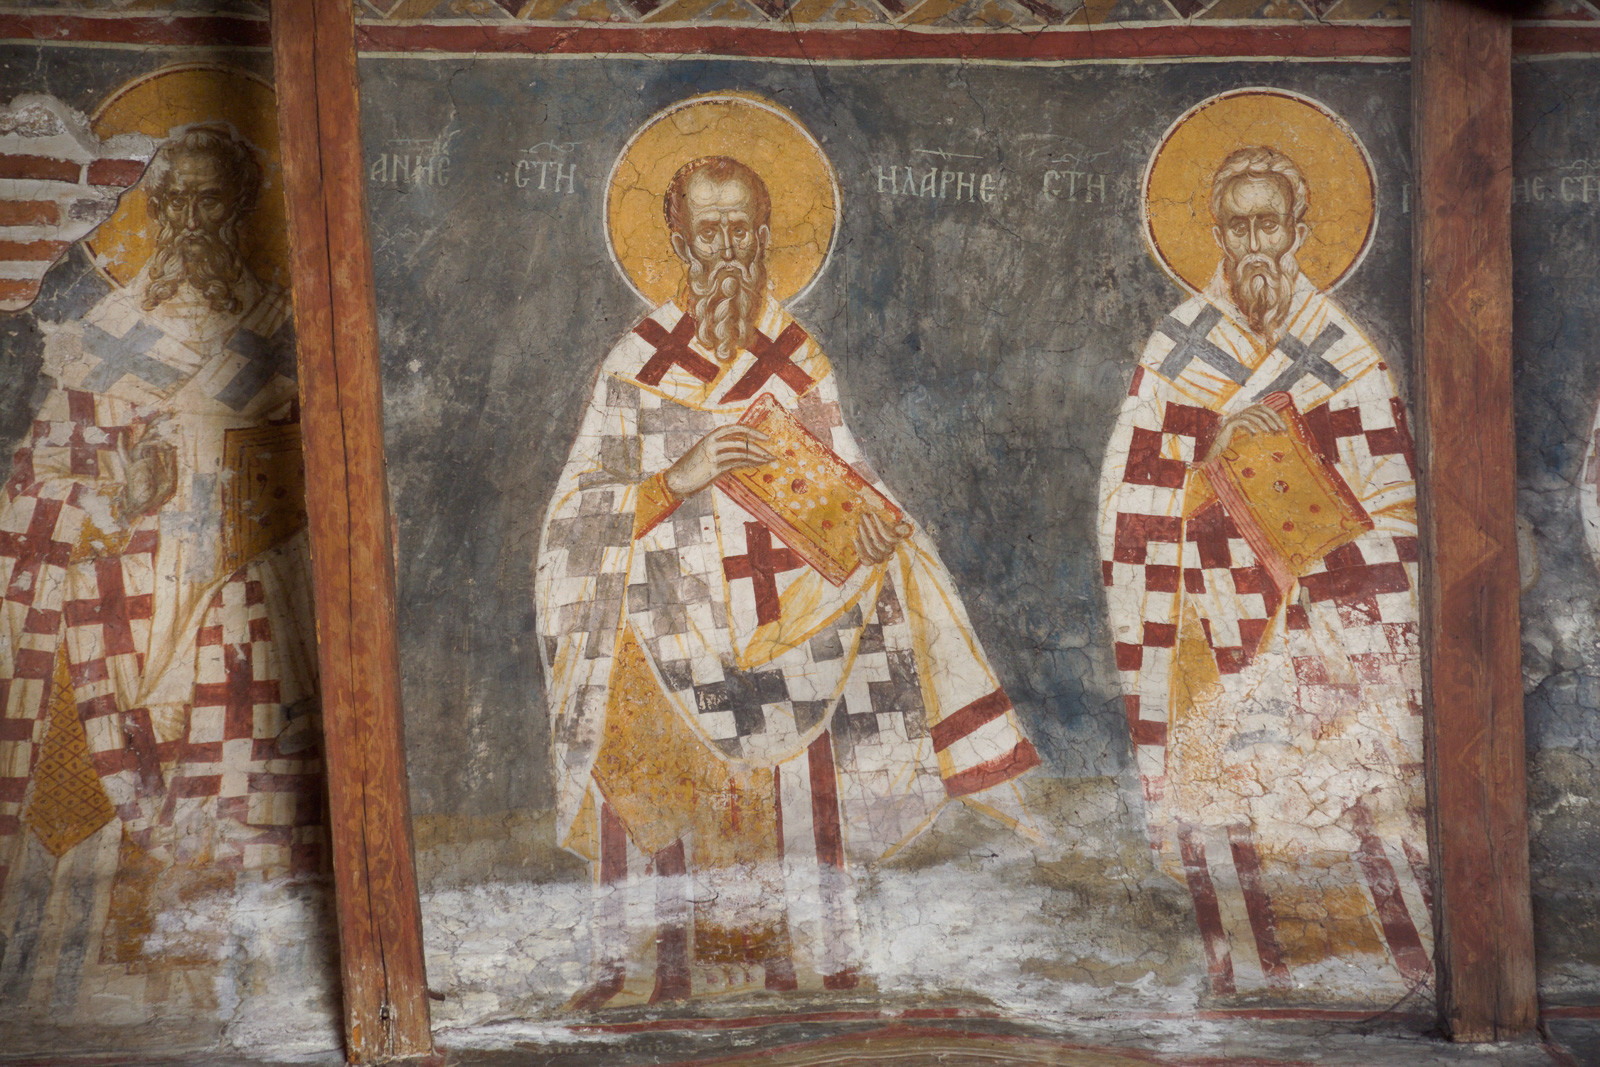 94a Portraits of bishops (from the right): St. Athanasius, St. John, St. Gregory, St. Hilarion, St. Anicius, unknown bishop